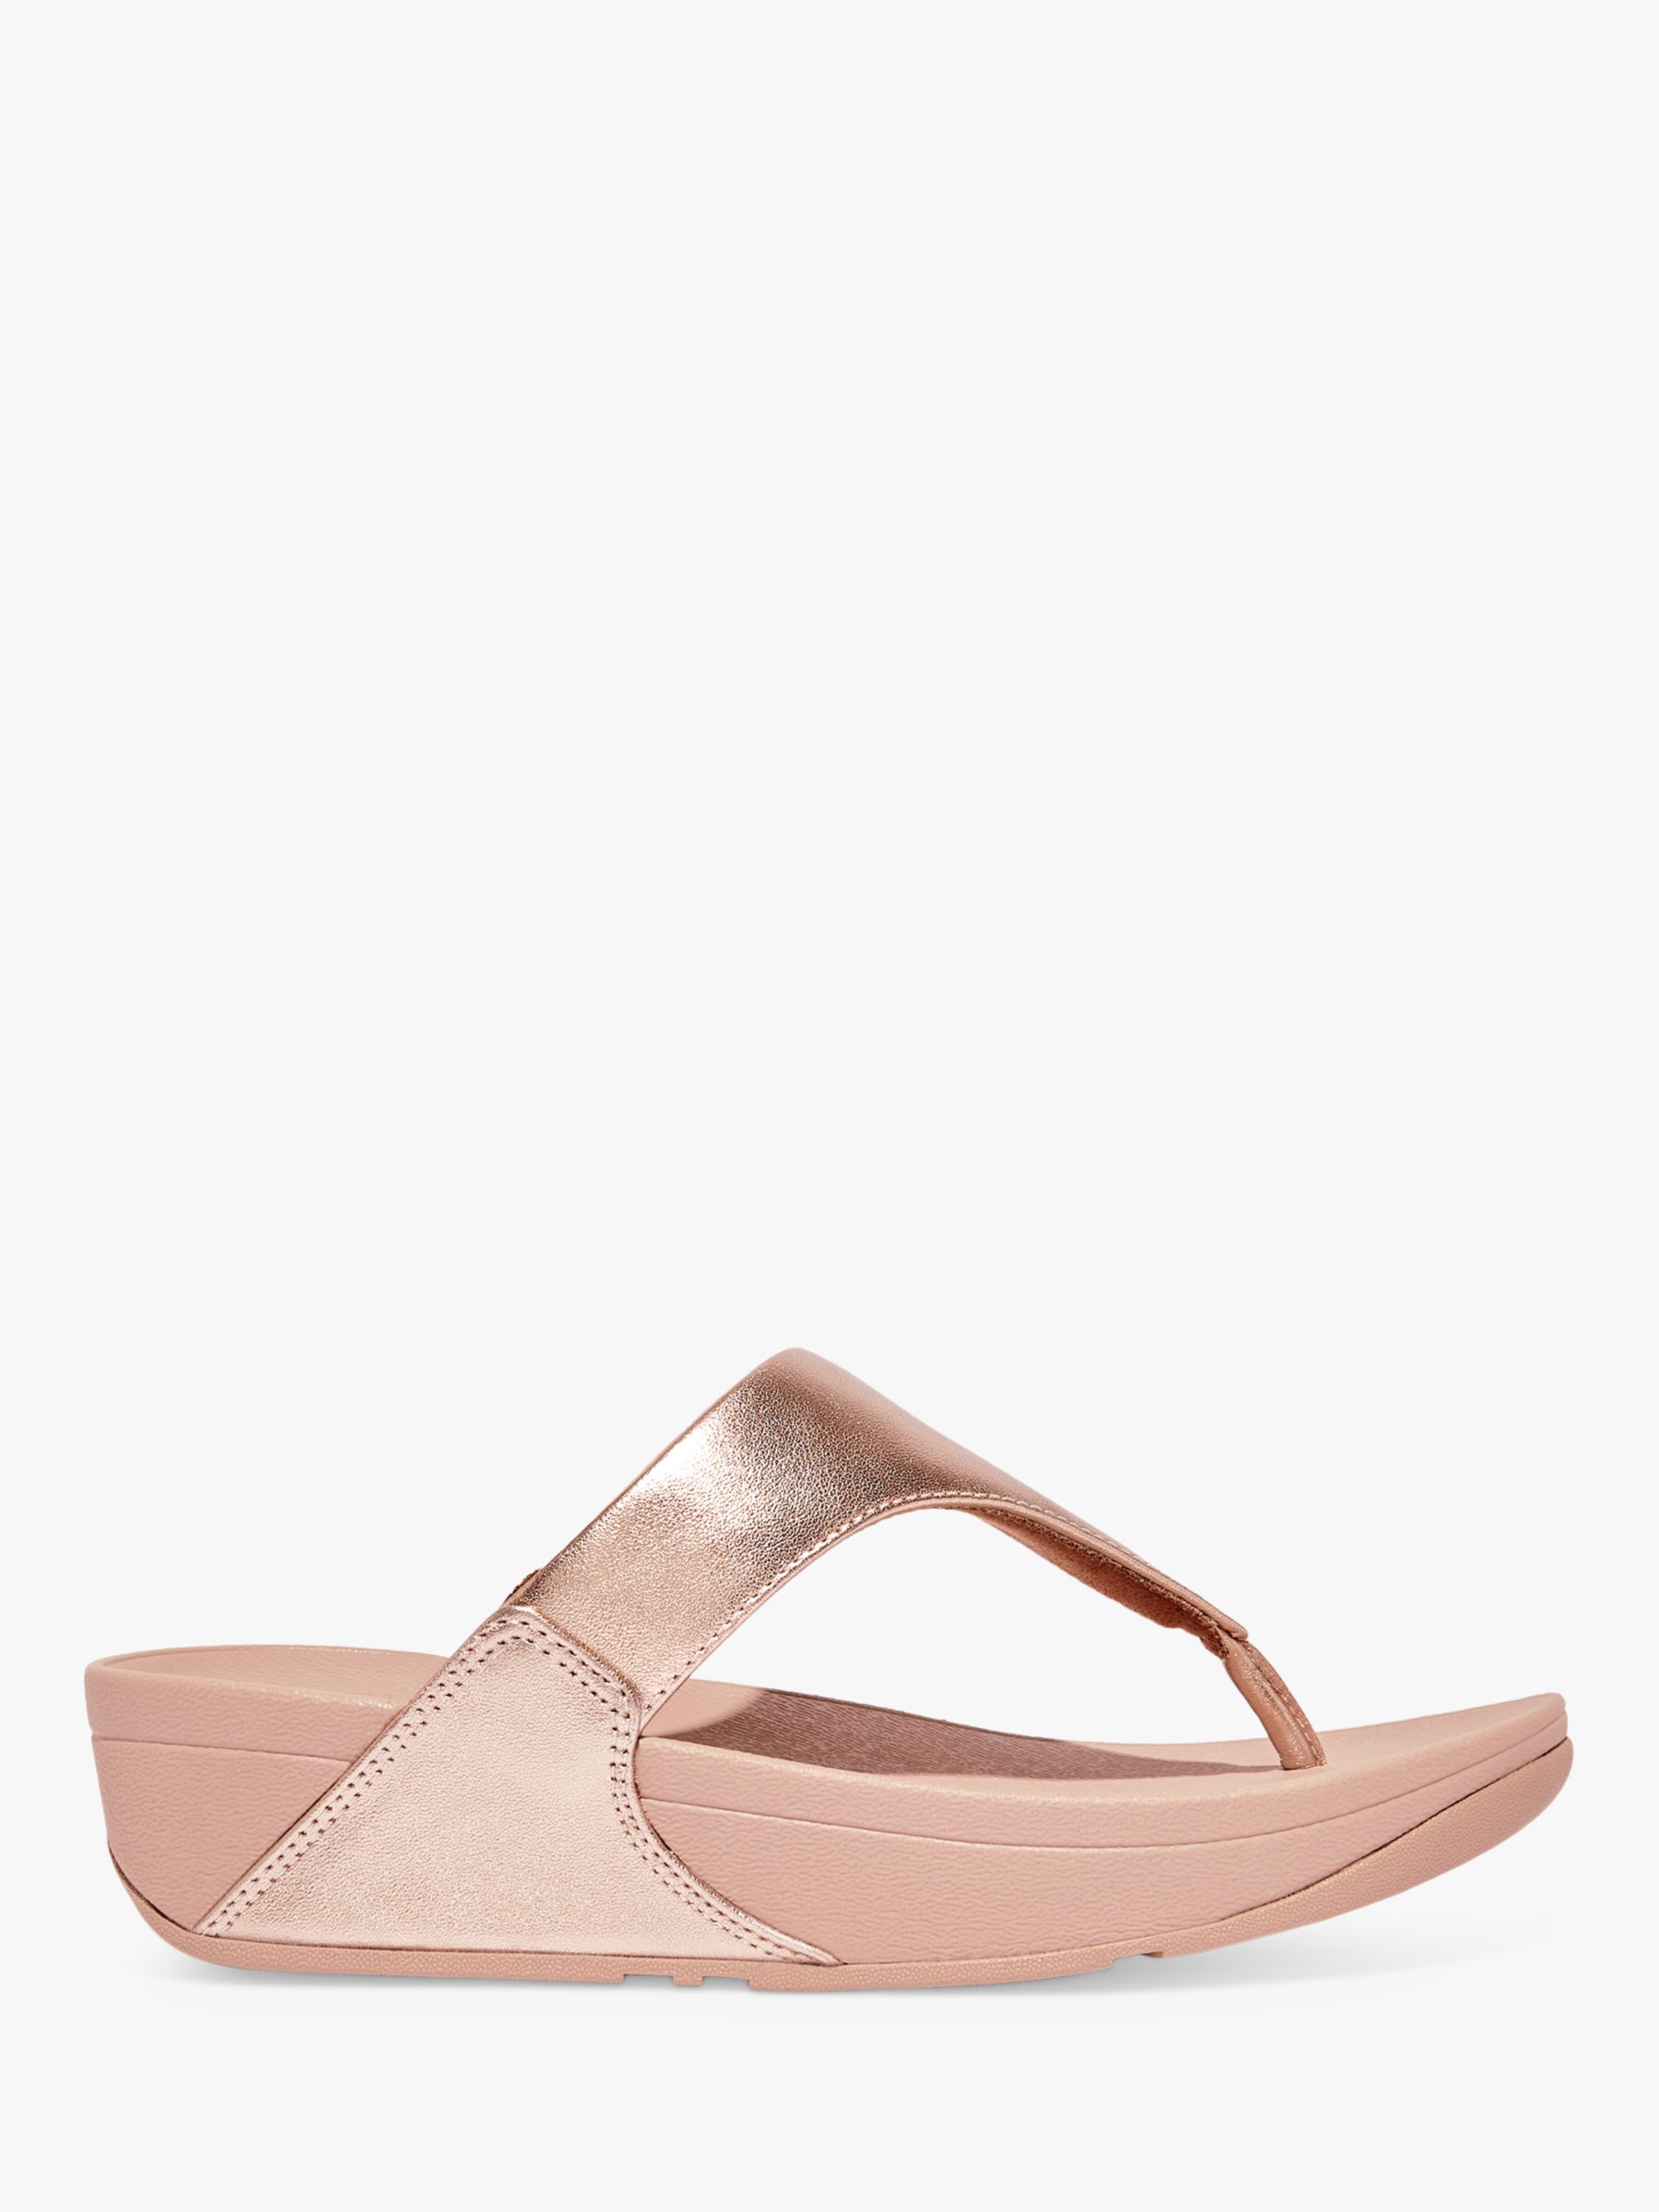 FitFlop Lulu leather Flip Flops, Gold at John Lewis & Partners